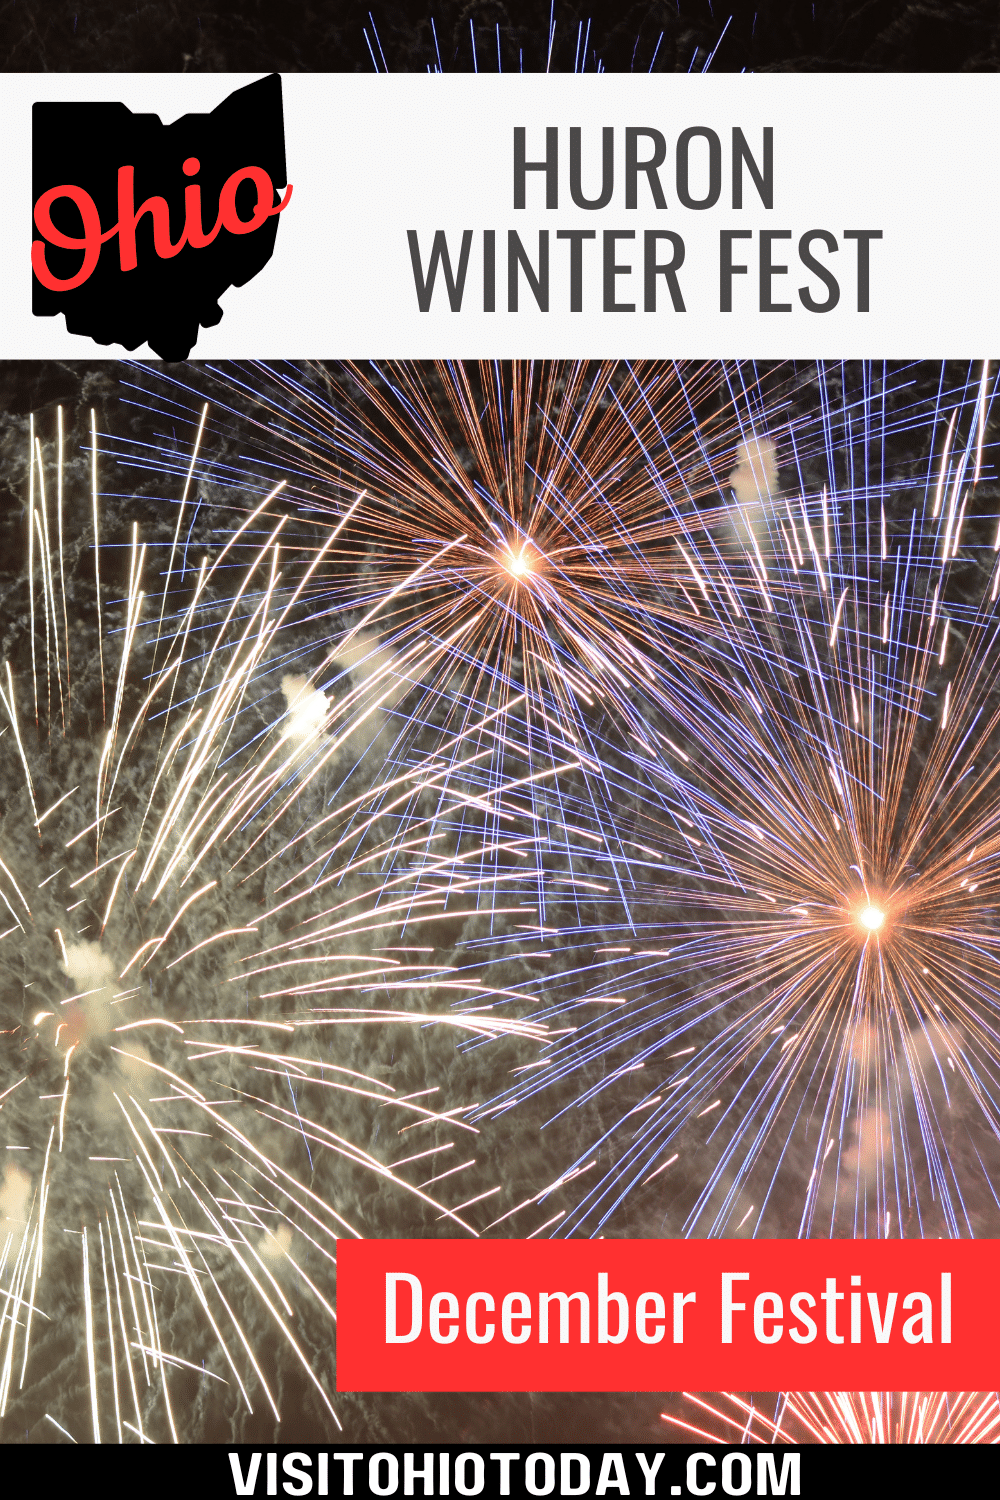 The City of Huron’s Winter Fest is a family-oriented festival full of holiday activities. The Huron Winter Fest is in early December.